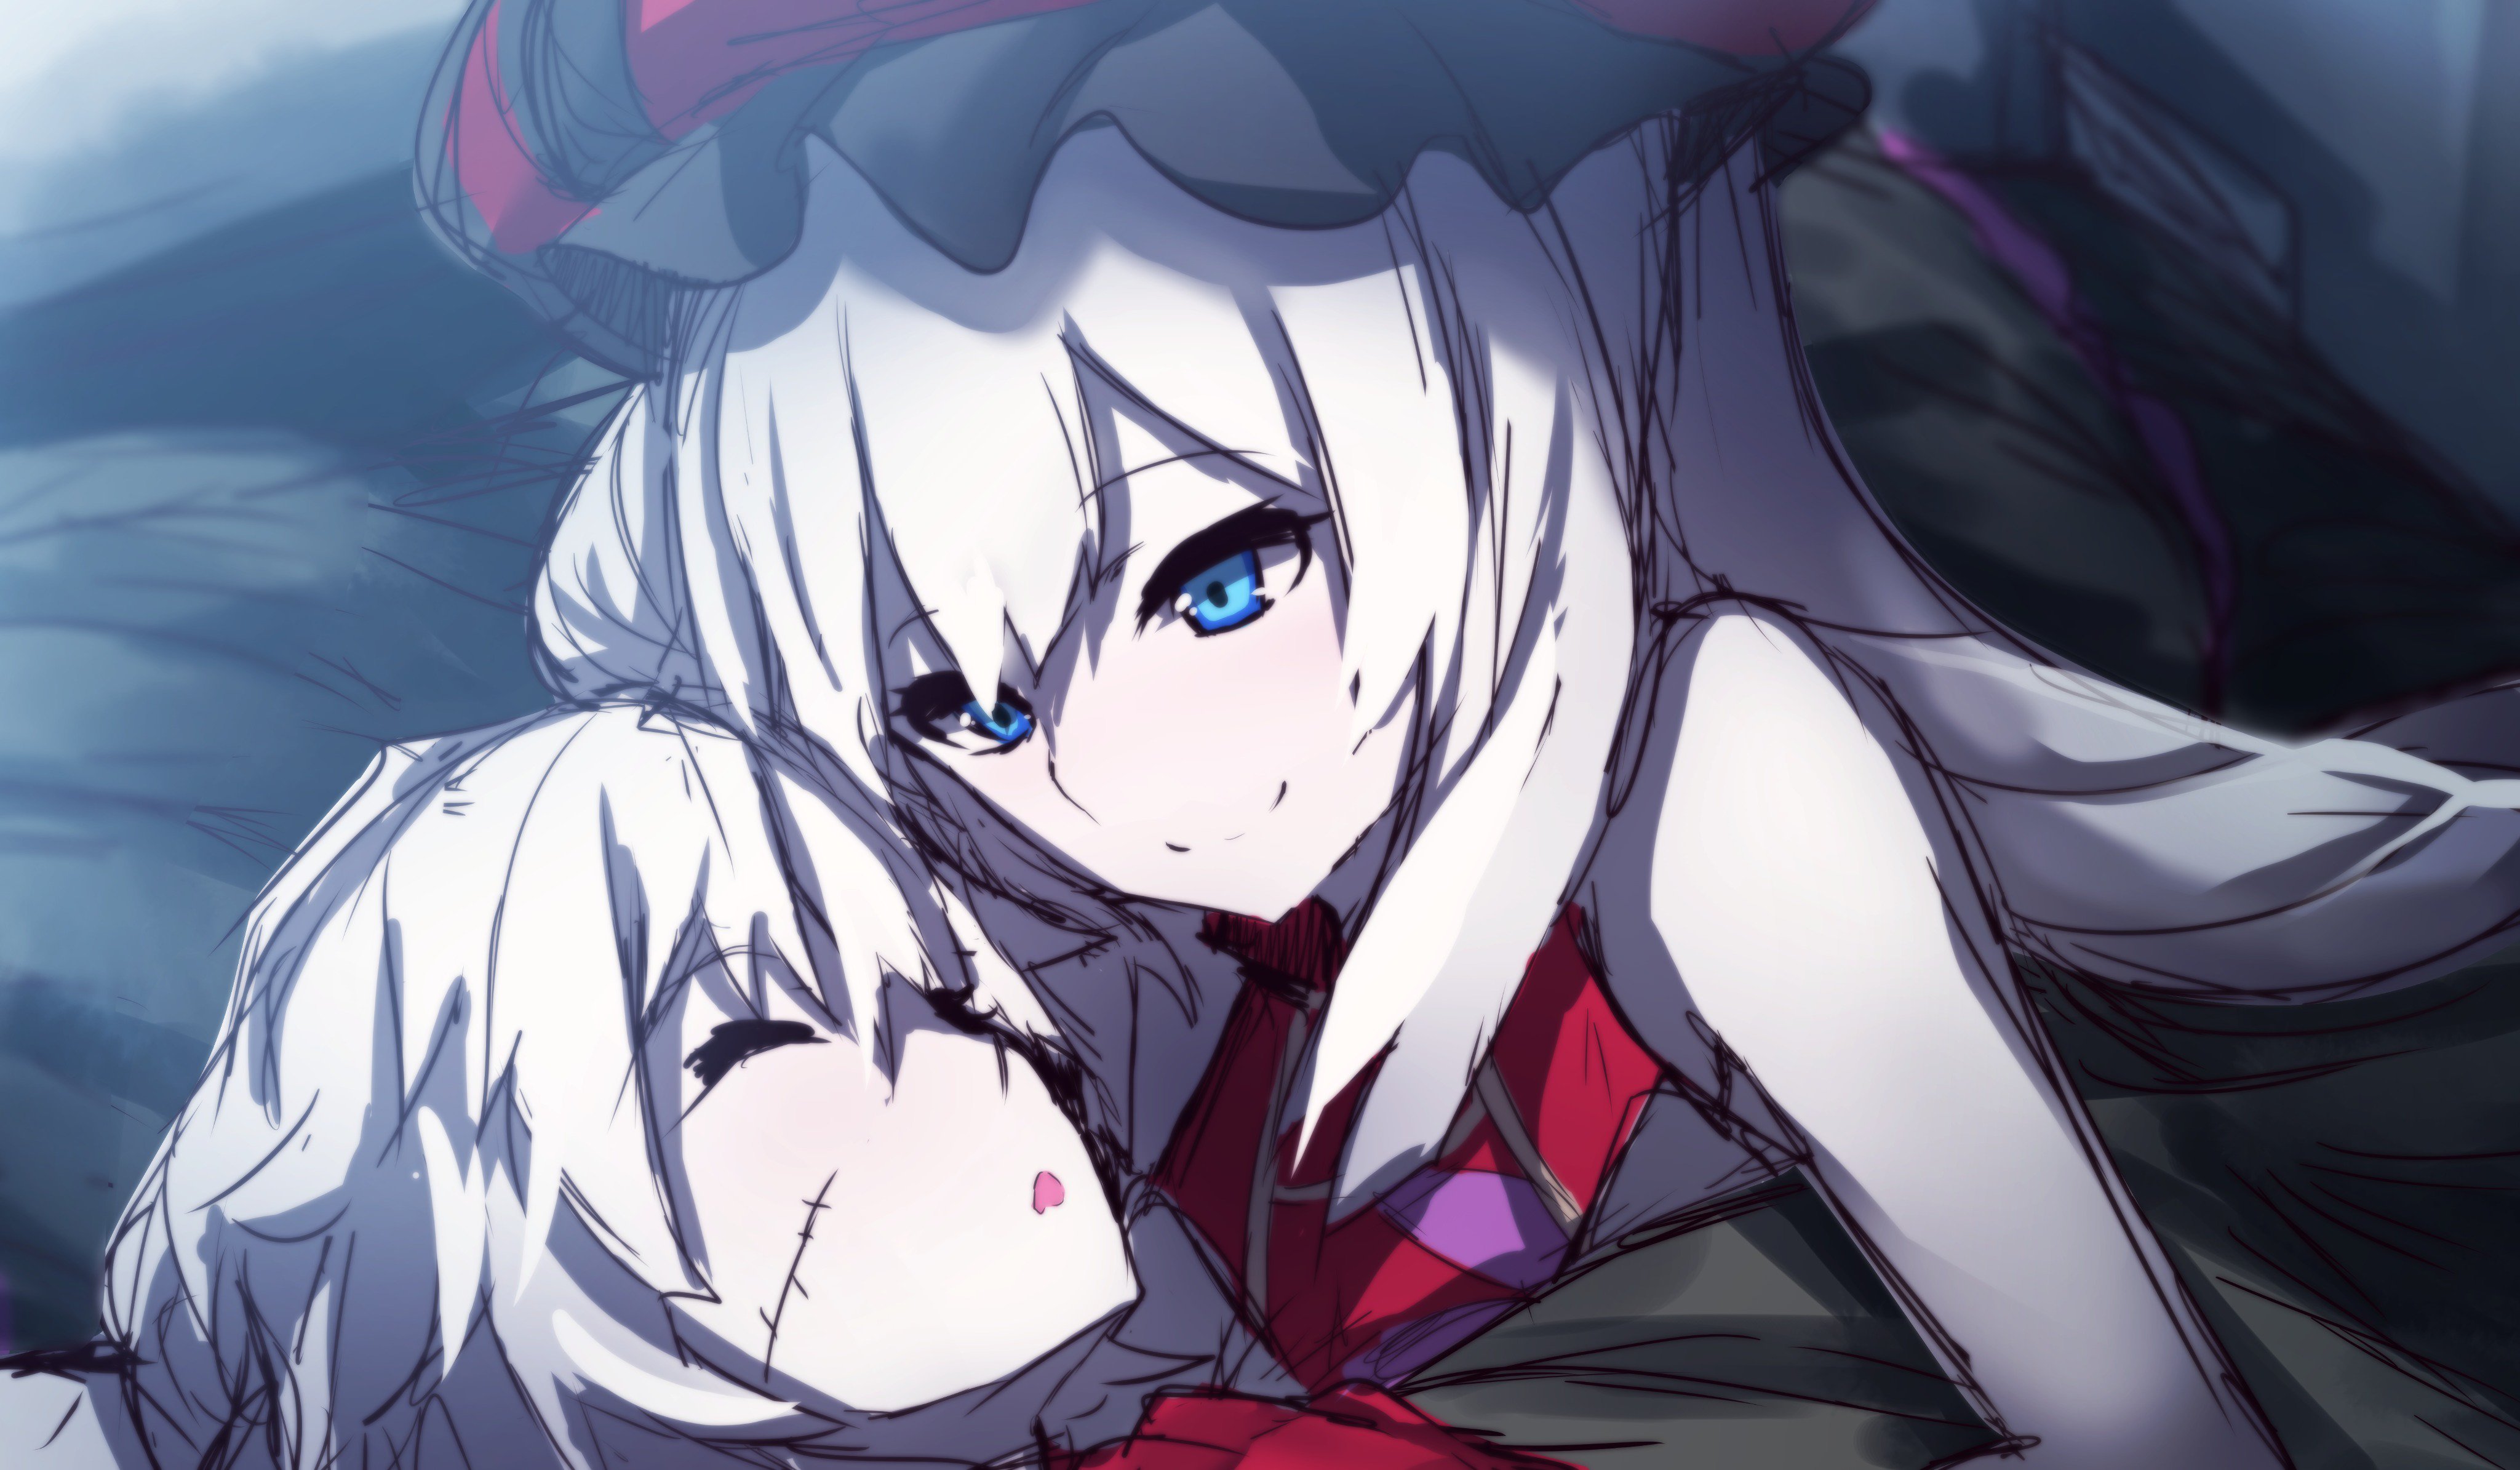 Jack The Ripper Fate Apocrypha Marie Antoinette Fate Grand Order 4096x2389